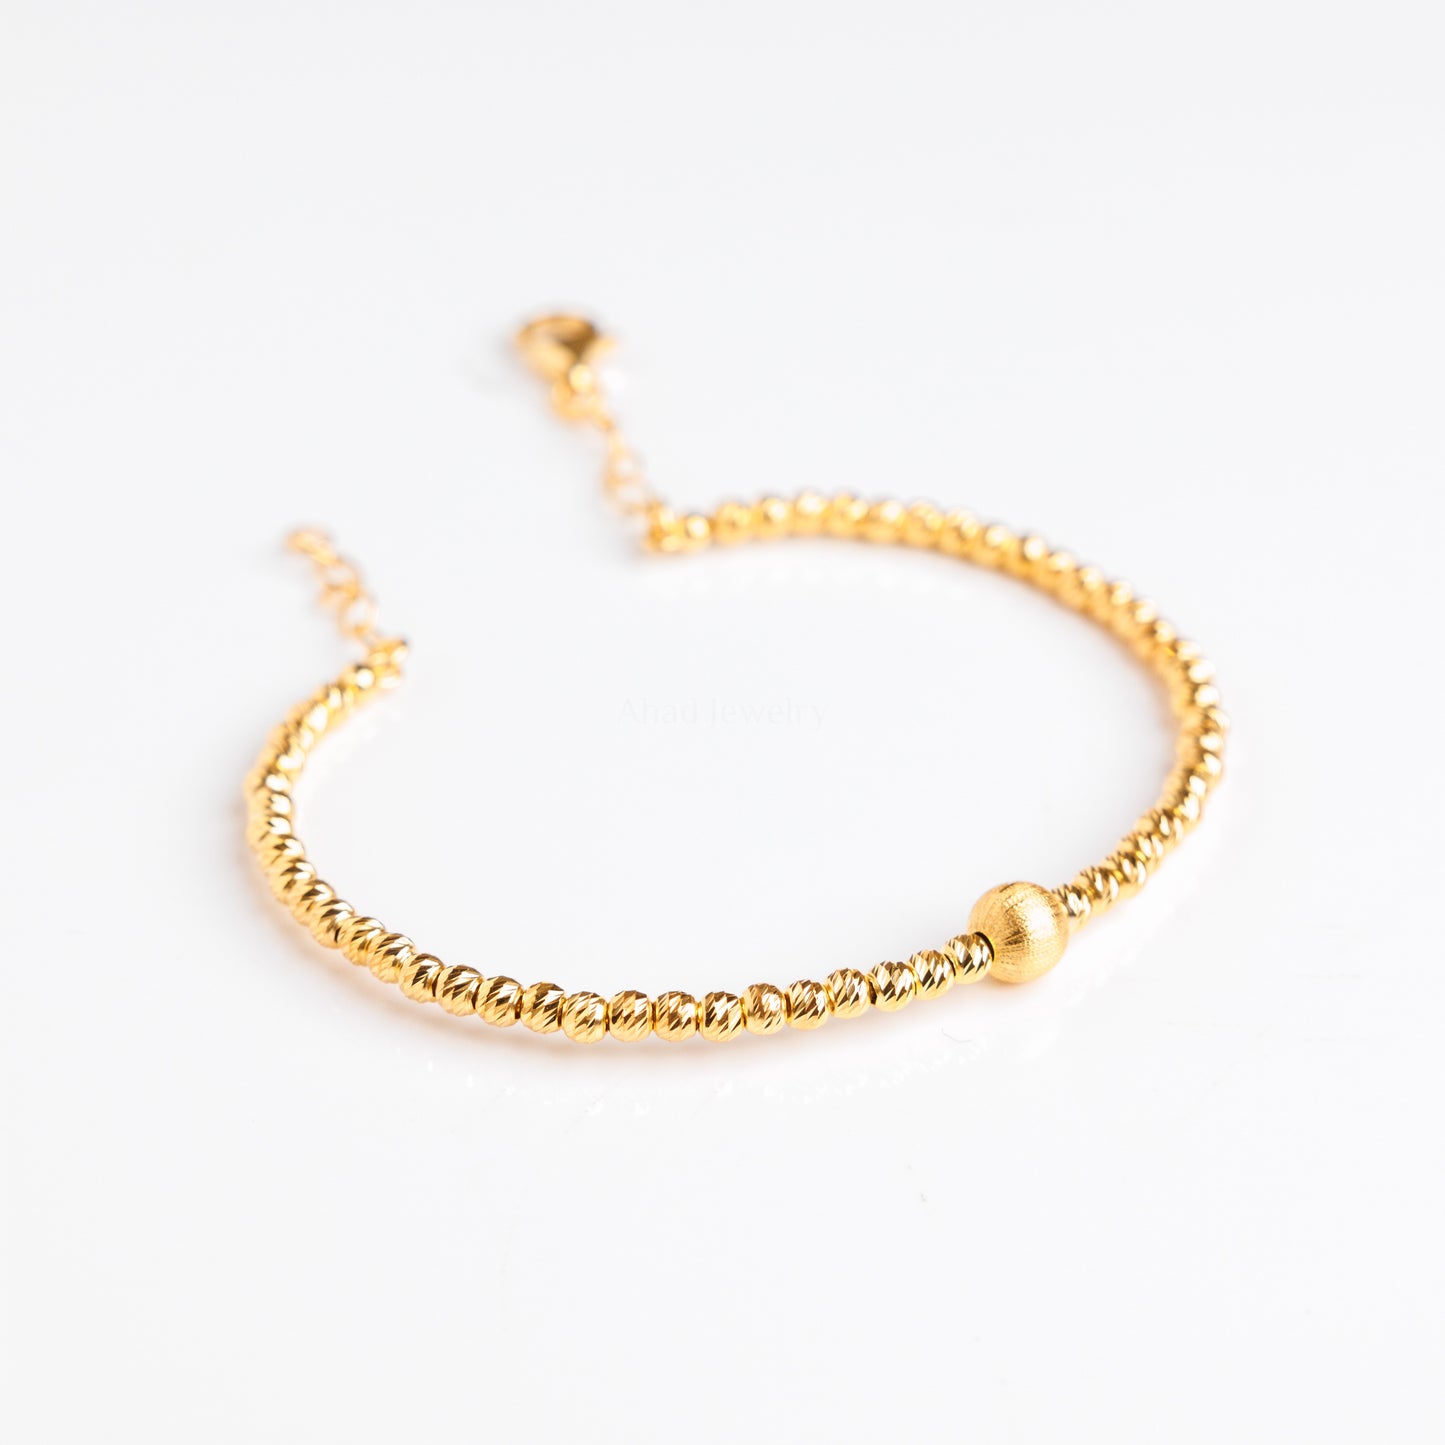 Cuff Bracelet | Silver 925 & Gold Plated